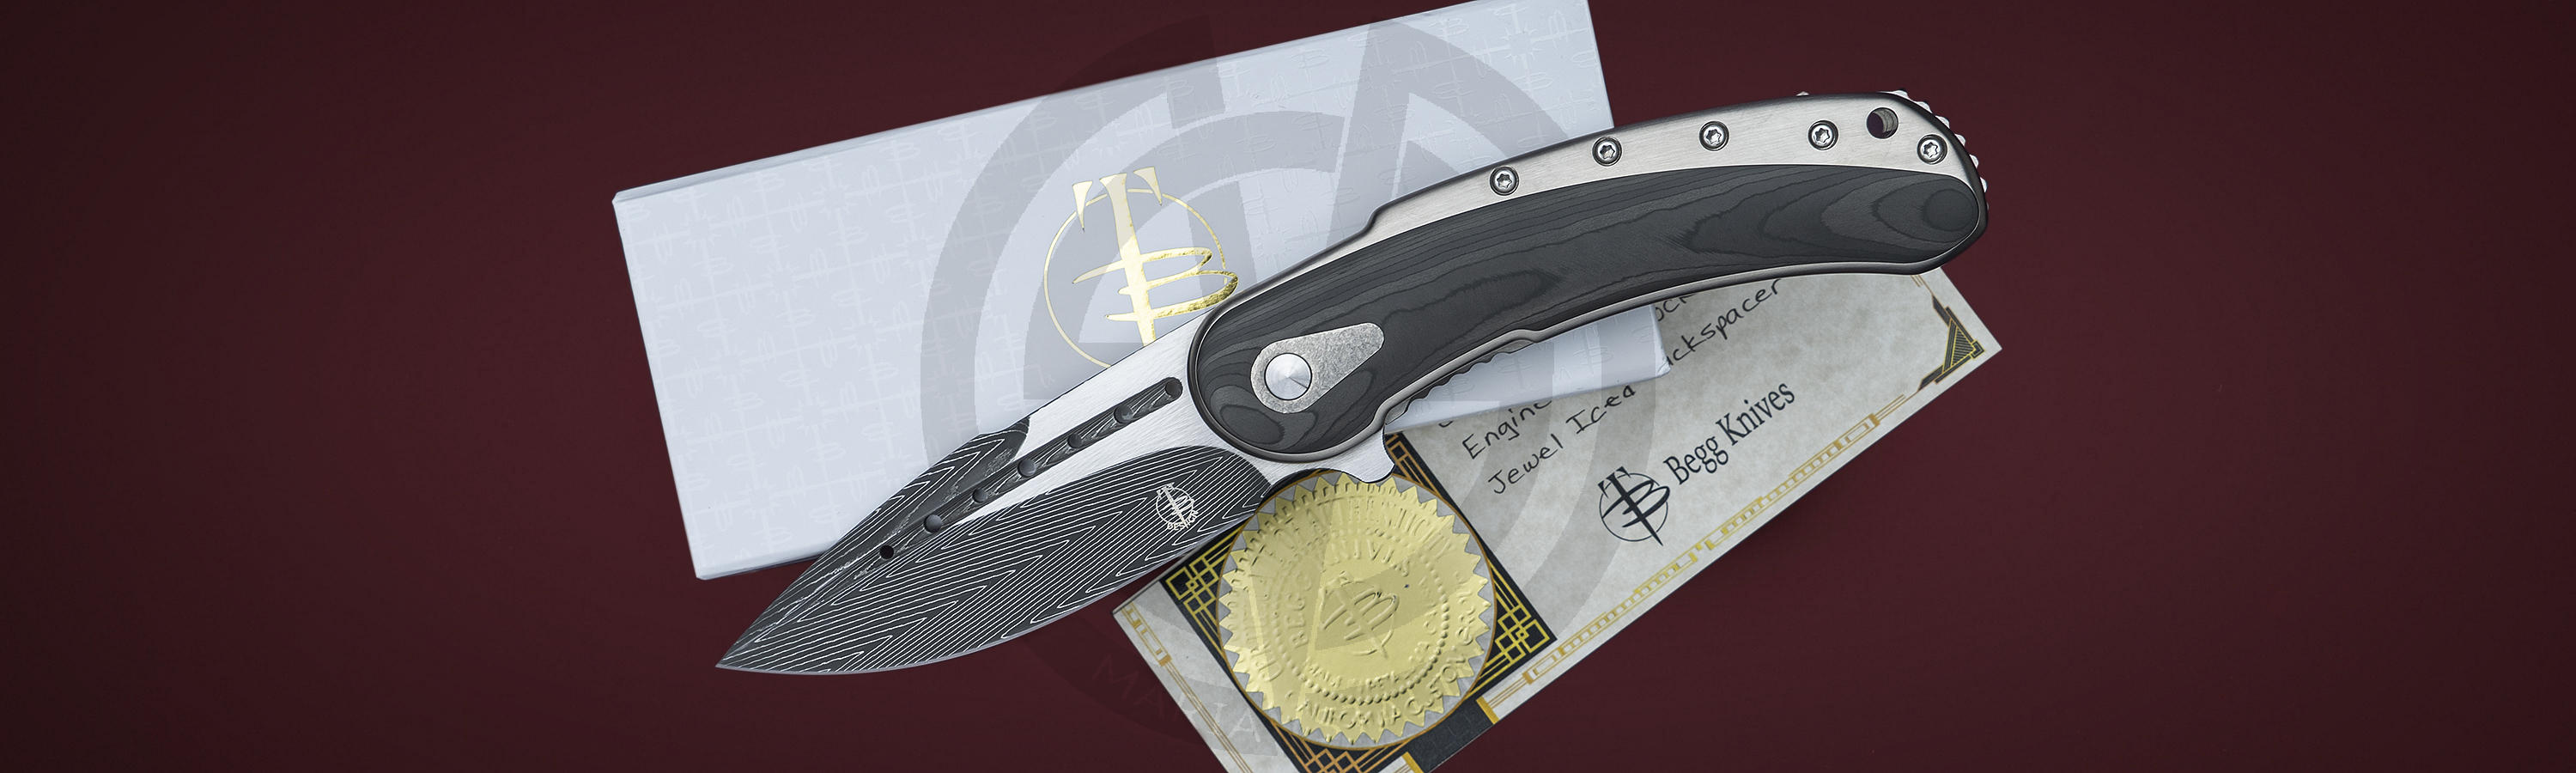 Begg Knives сertificate of authenticity